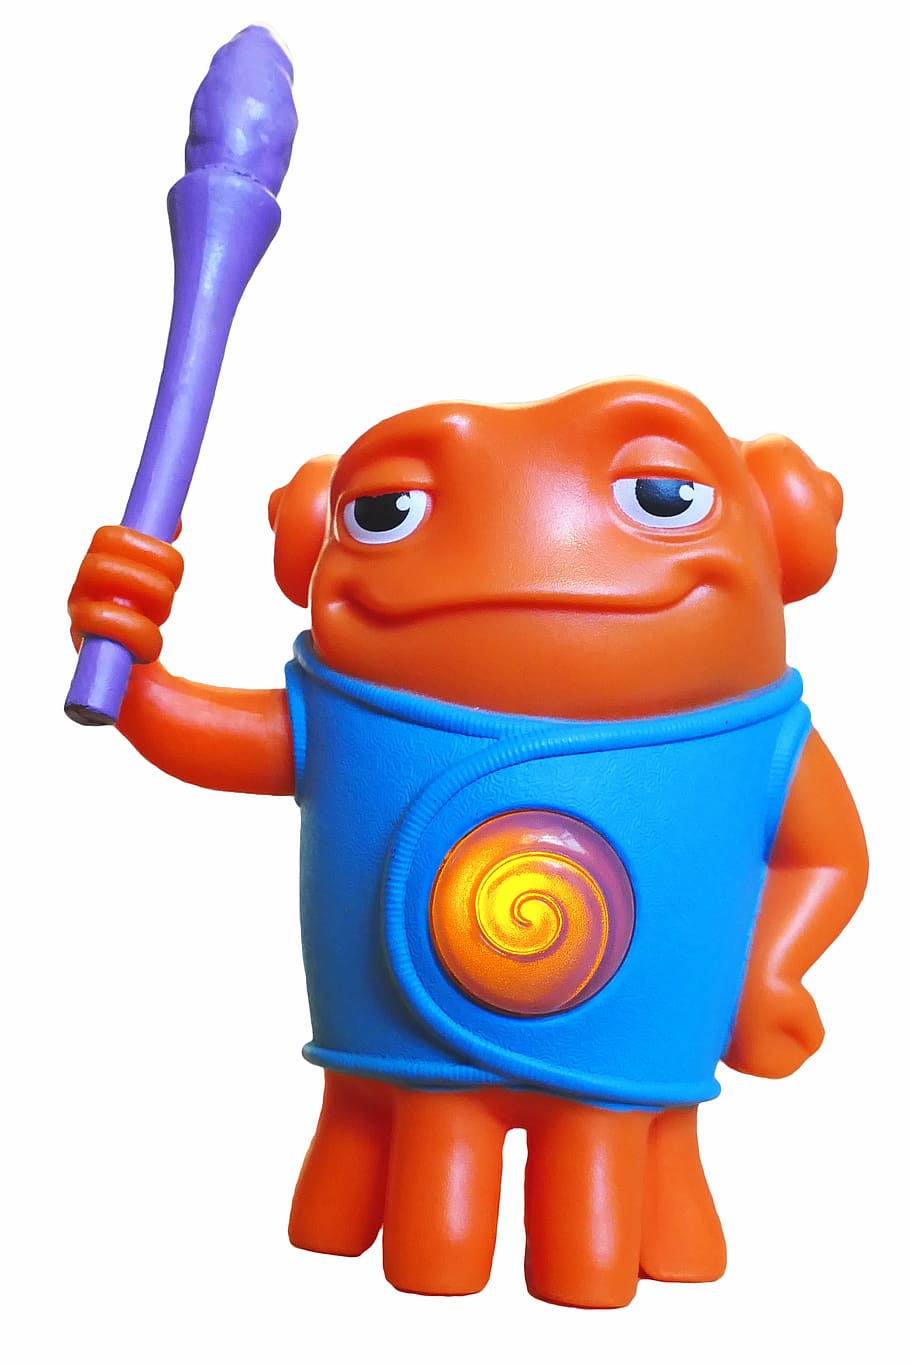 orange, frog character toy, home, alien, space, science, fiction, toys, kids, cute